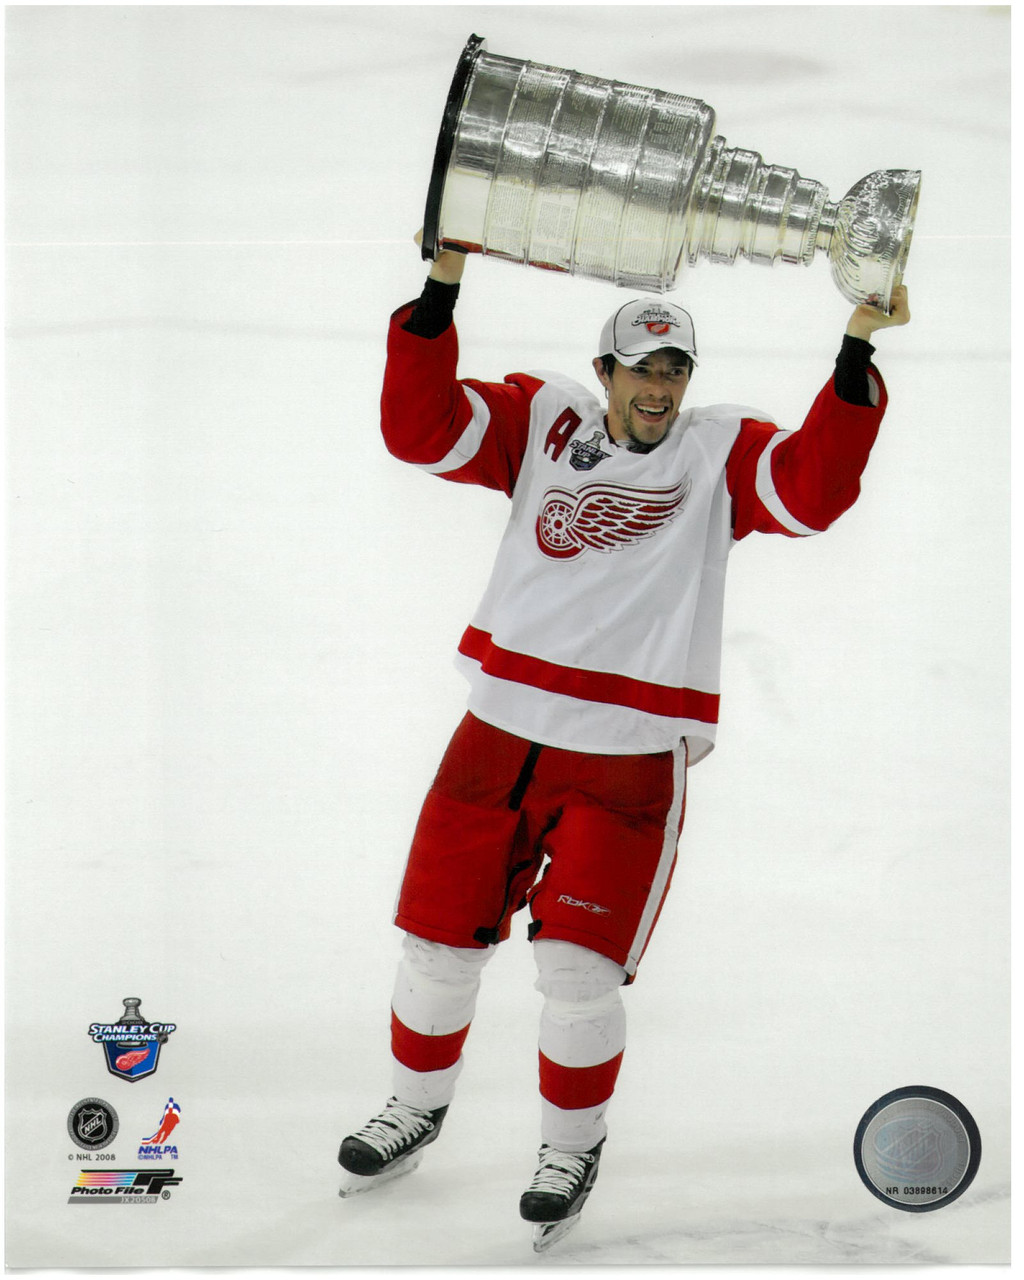 2008 Stanley Cup Champs  Detroit red wings, Red wings hockey, Detroit red  wings hockey